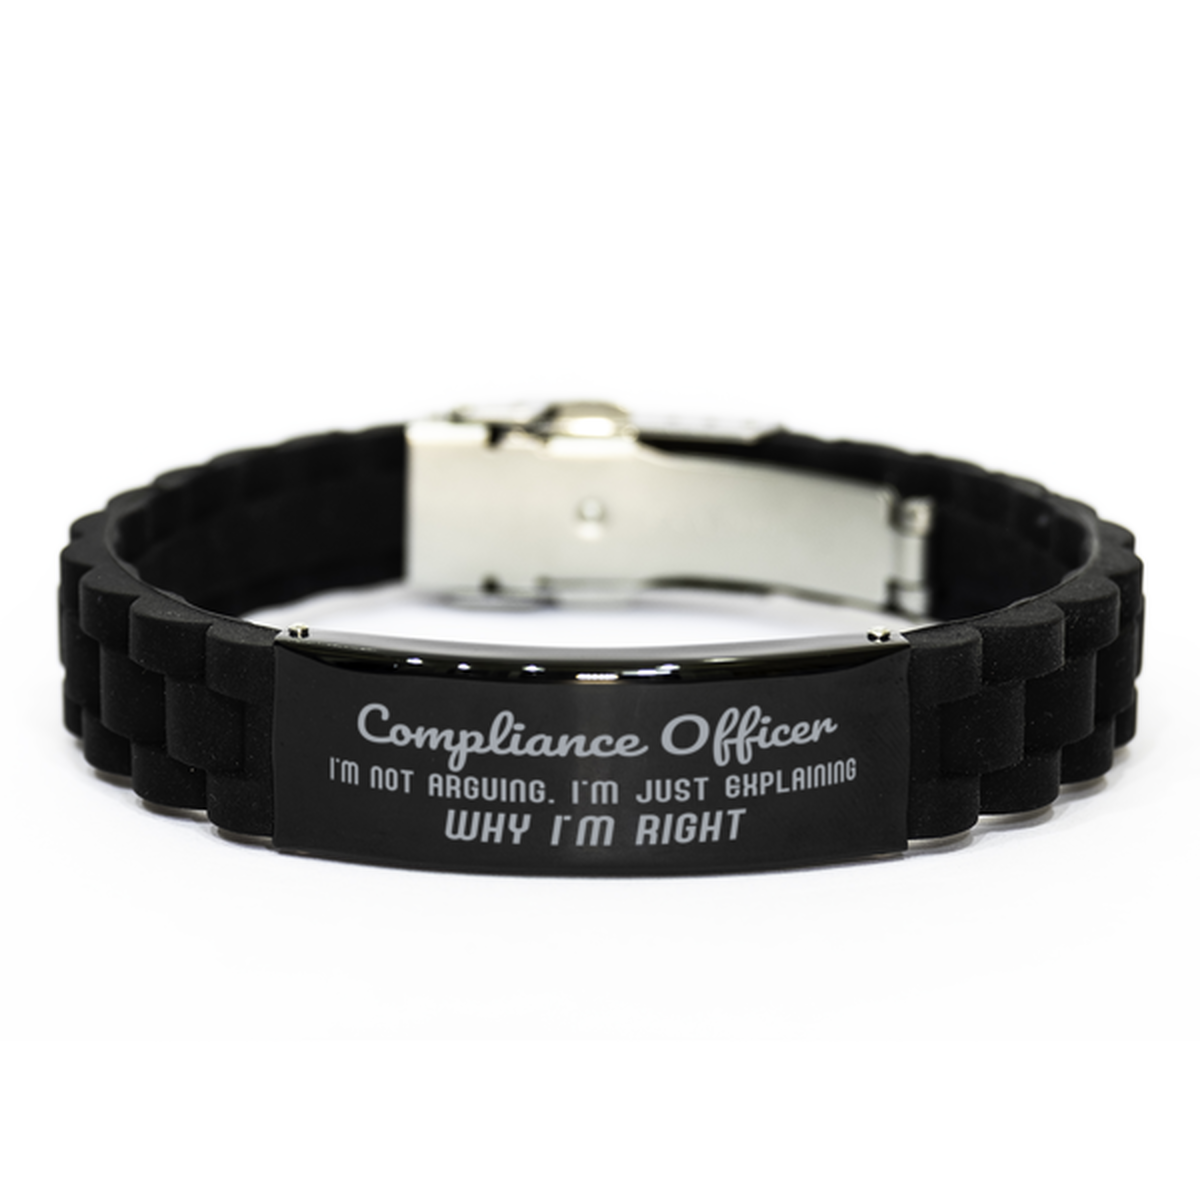 Compliance Officer I'm not Arguing. I'm Just Explaining Why I'm RIGHT Black Glidelock Clasp Bracelet, Funny Saying Quote Compliance Officer Gifts For Compliance Officer Graduation Birthday Christmas Gifts for Men Women Coworker